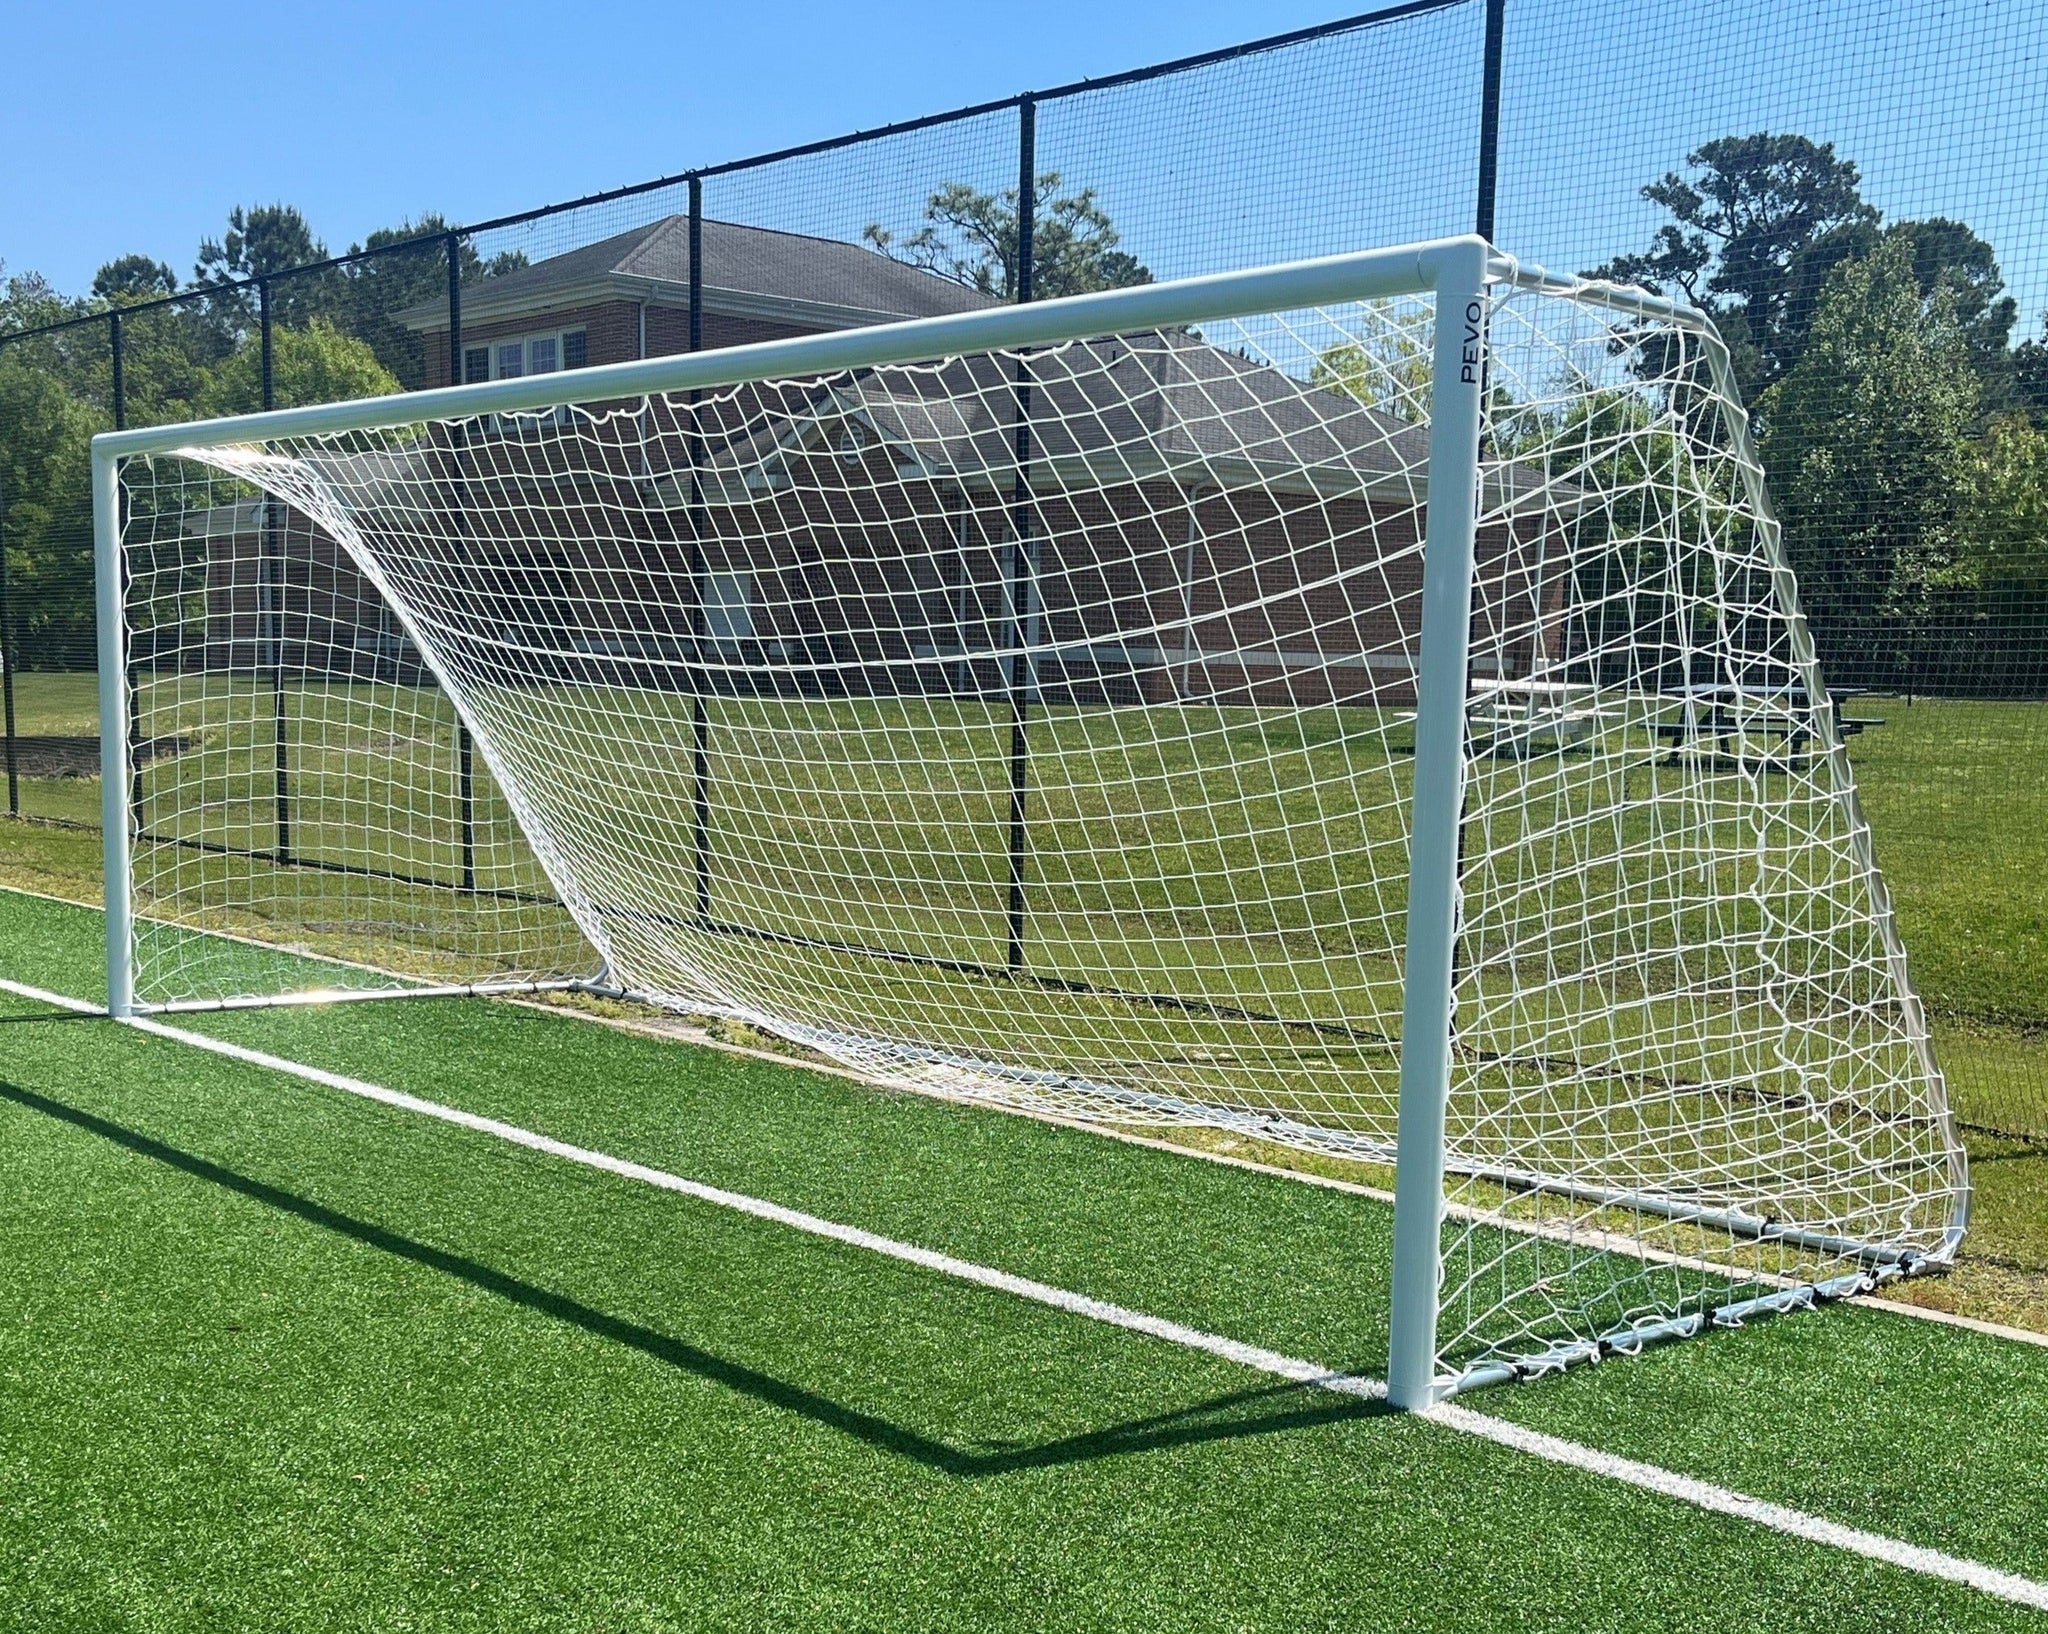 Competition Series Soccer Goal - 7x21